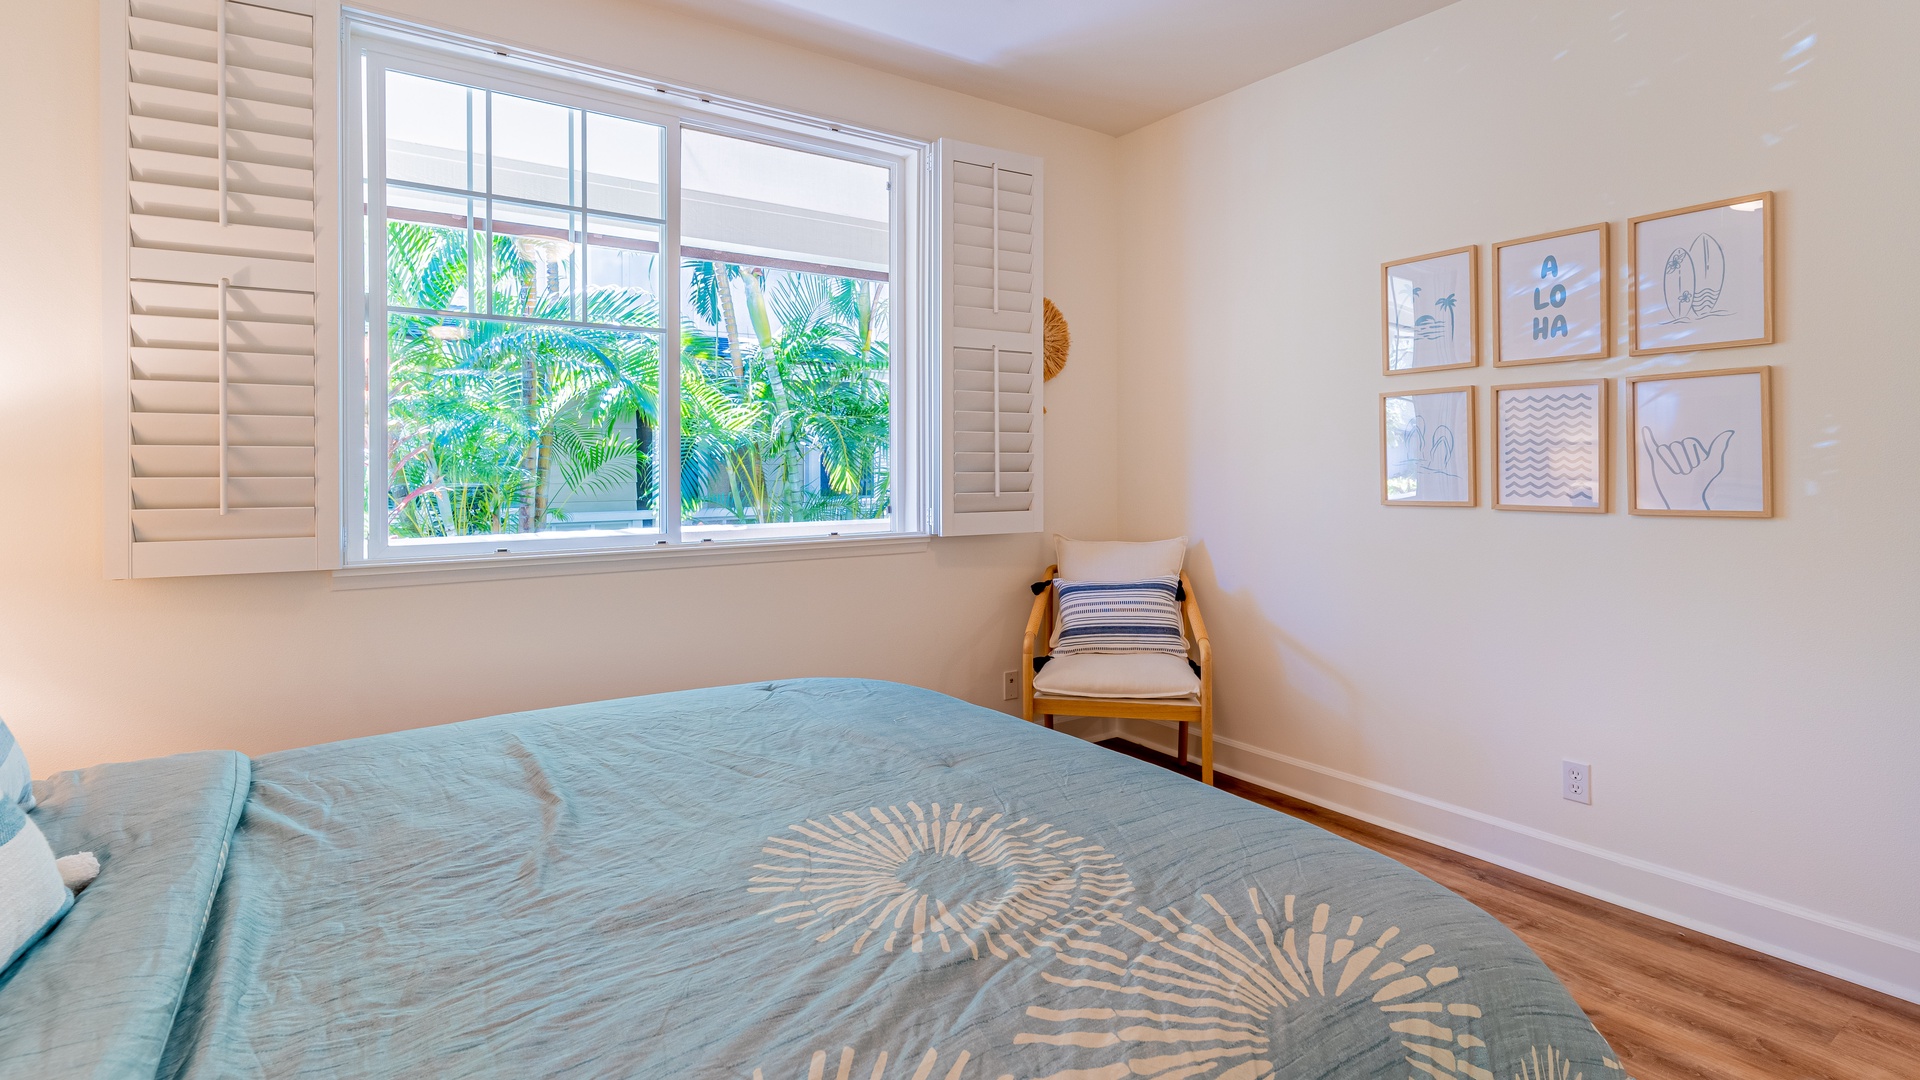 Kapolei Vacation Rentals, Ko Olina Kai 1033A - The second guest bedroom has a queen bed, scenery and tasteful decor.